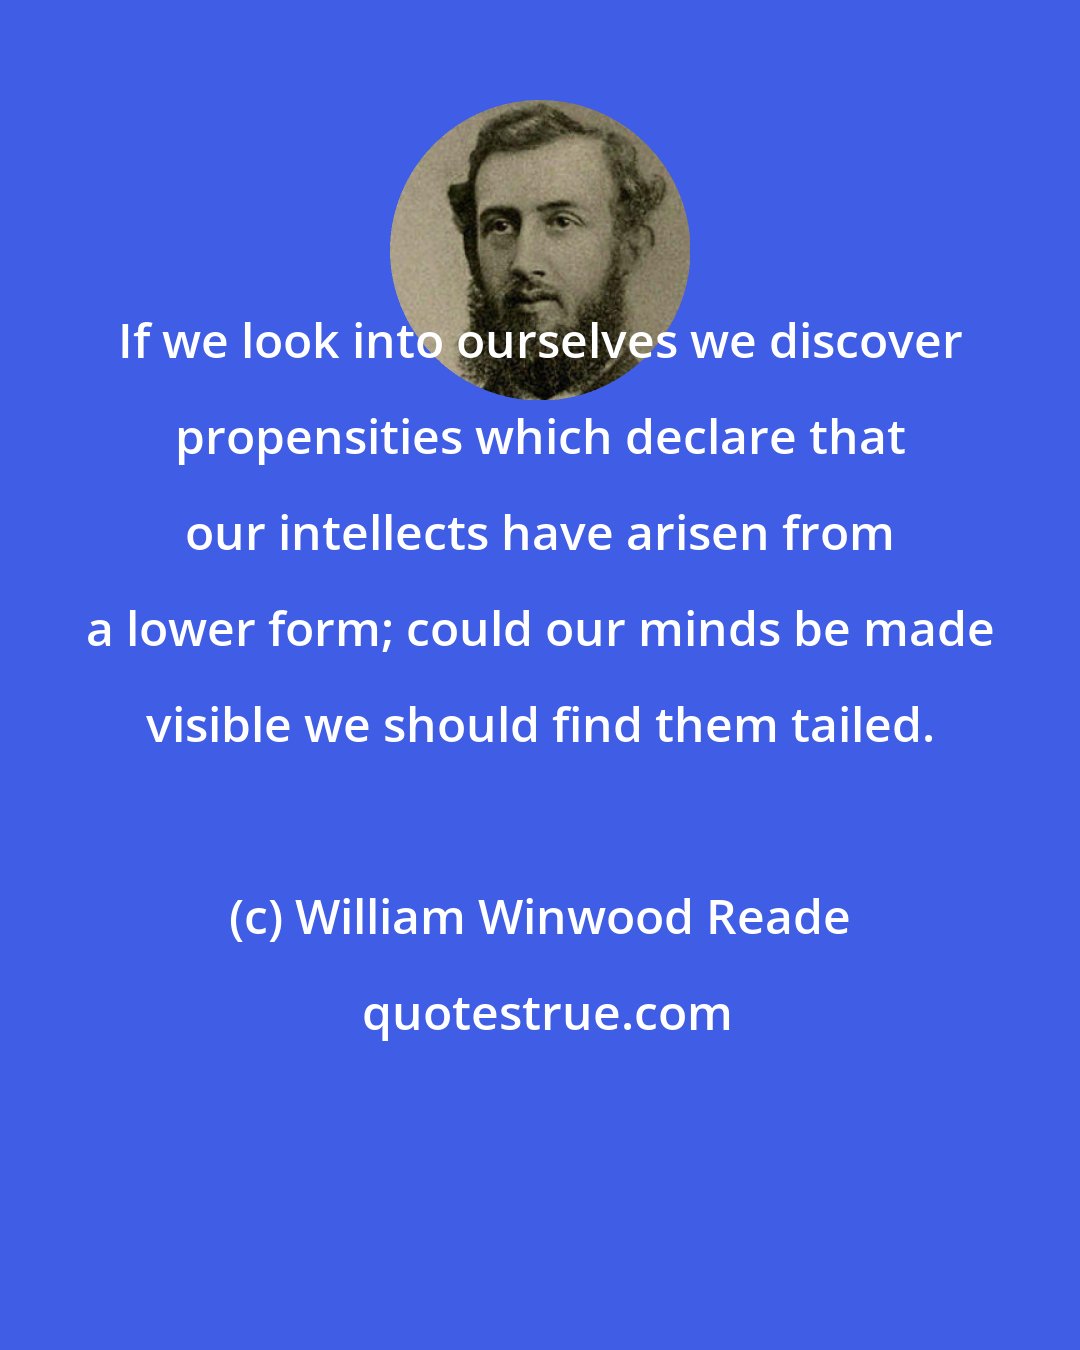 William Winwood Reade: If we look into ourselves we discover propensities which declare that our intellects have arisen from a lower form; could our minds be made visible we should find them tailed.